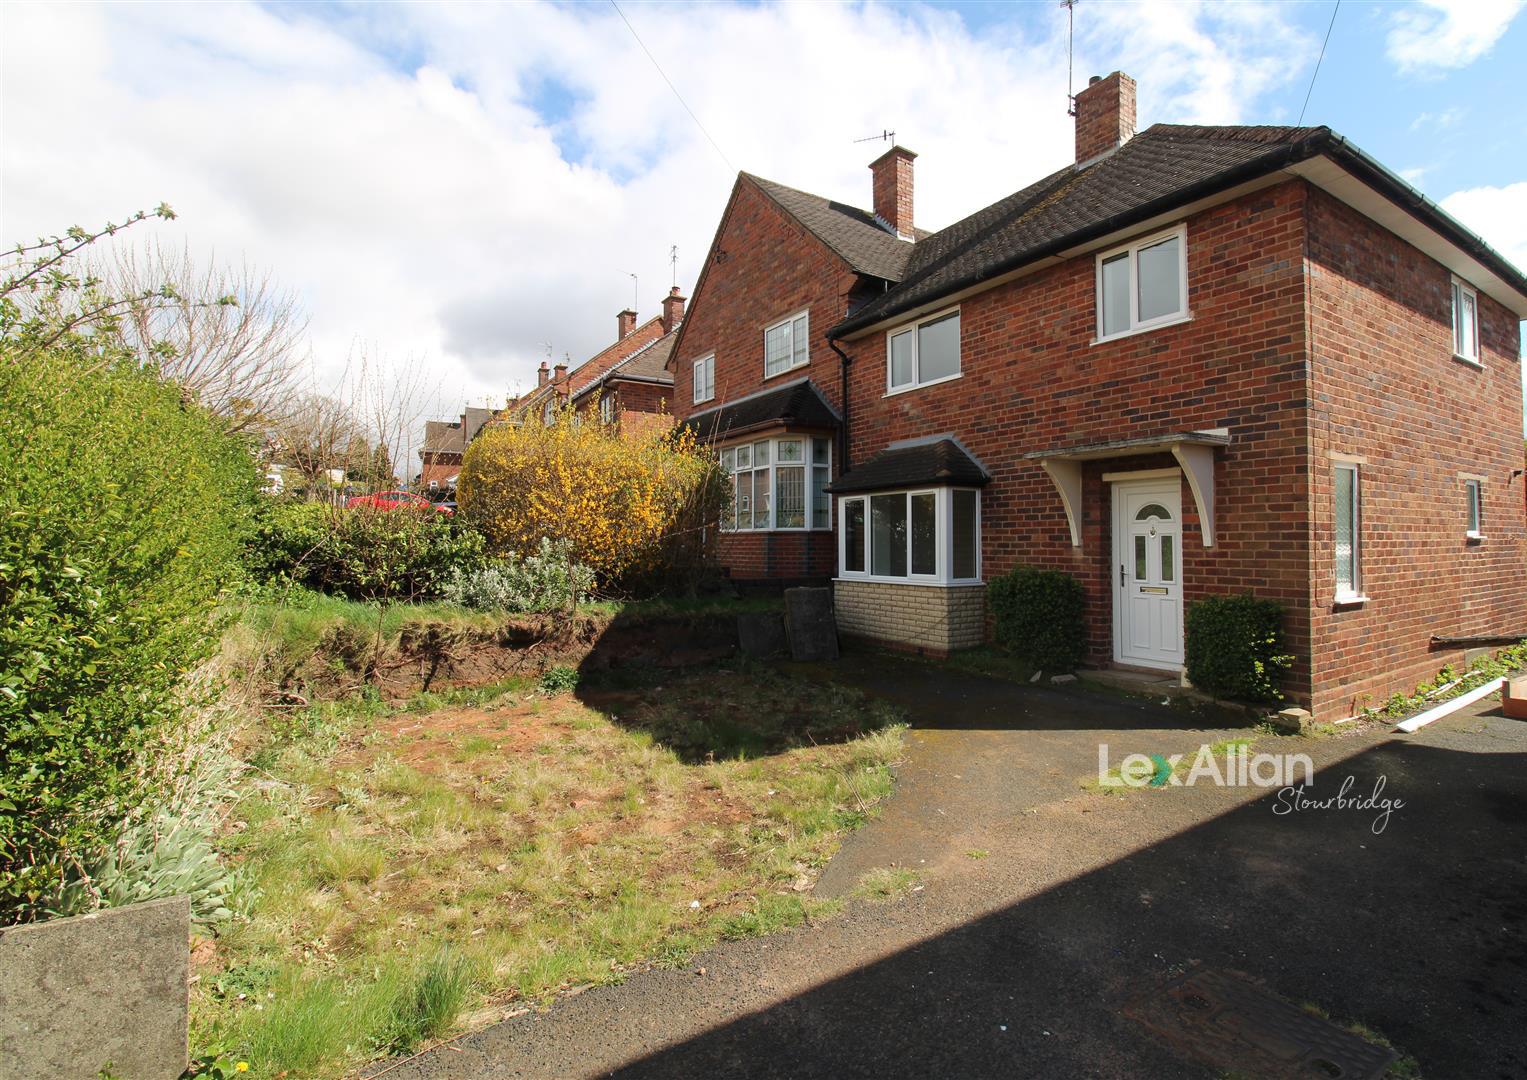 3 bed  for sale in Dorset Road, Stourbridge, DY8 